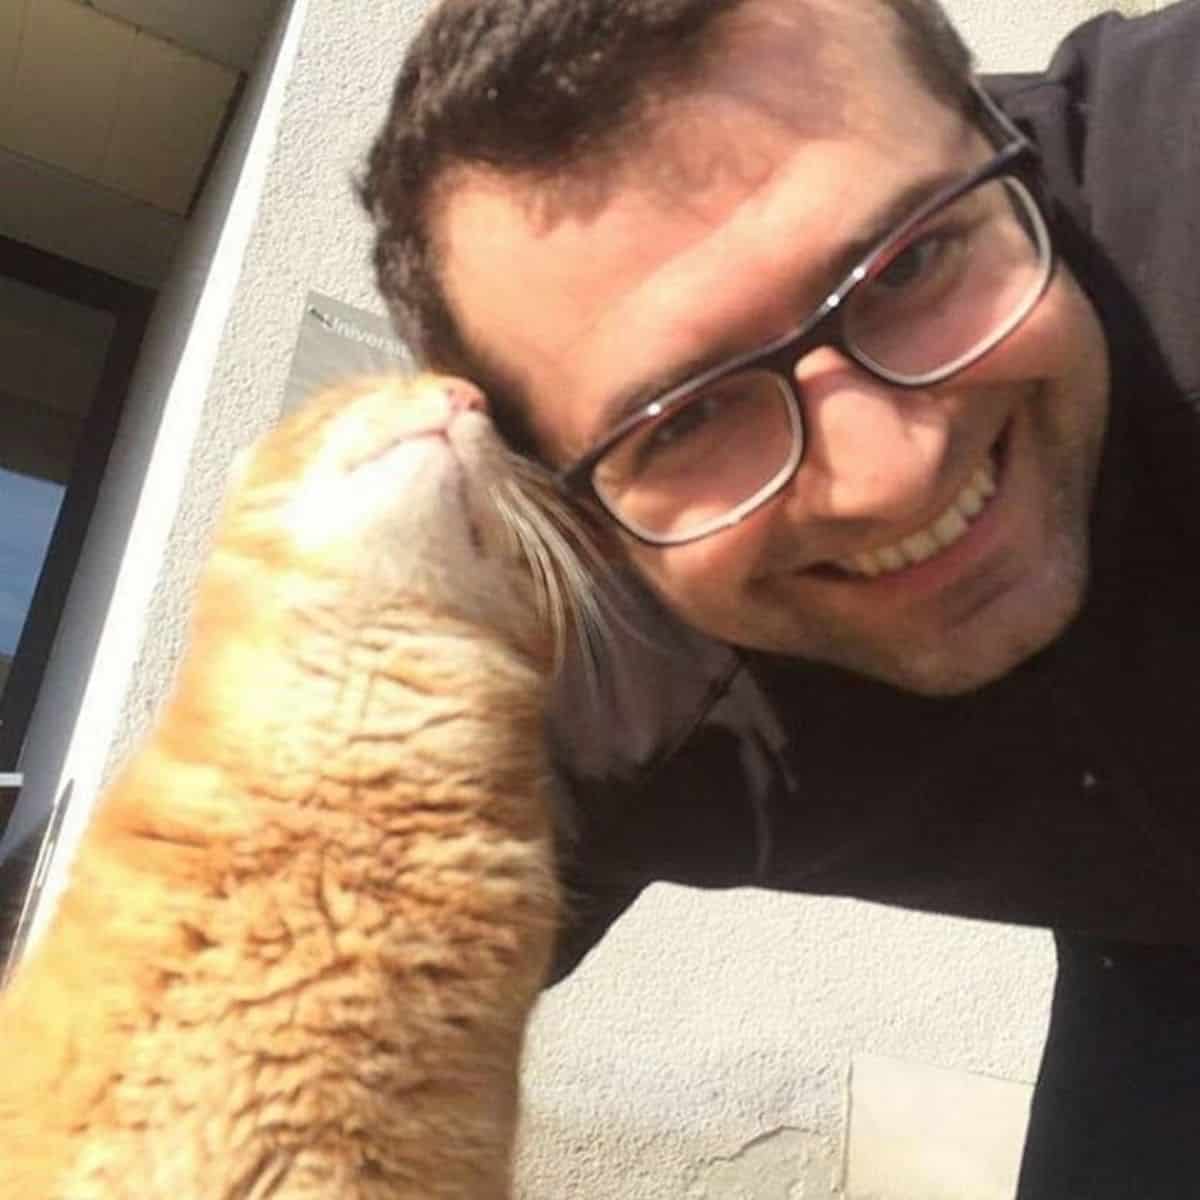 a smiling man with glasses cuddles with a cat